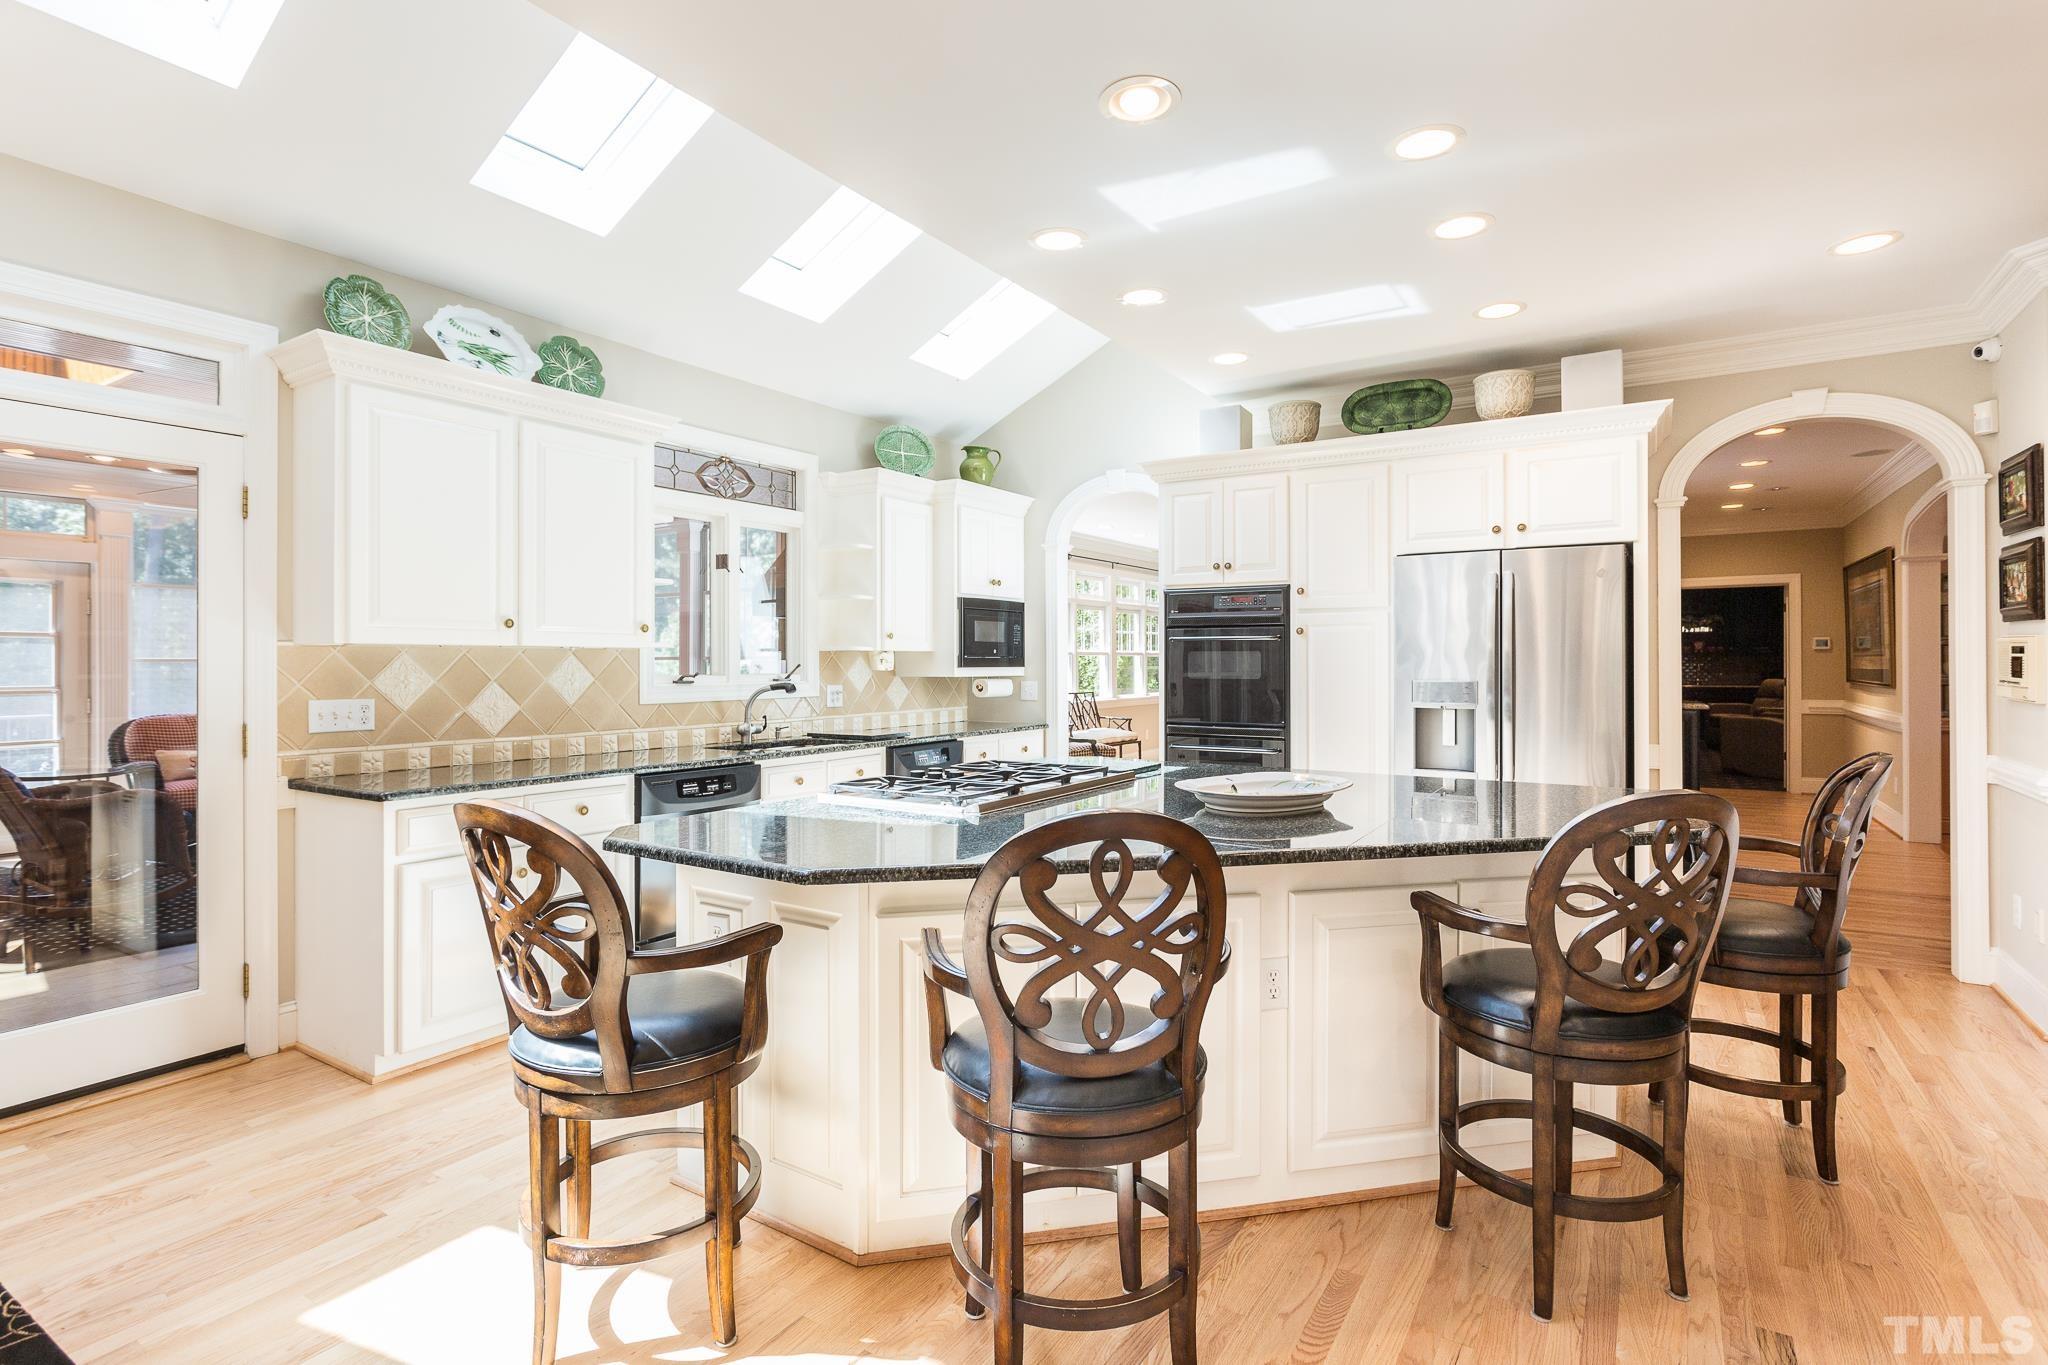 The open kitchen is illuminated by a full row of skylights.and features  a large central island, walk-in pantry, built-in desk, under-cabinet lighting, granite countertops, 6-burner gas cooktop, double ovens, two Kitchen Aid dishwashers